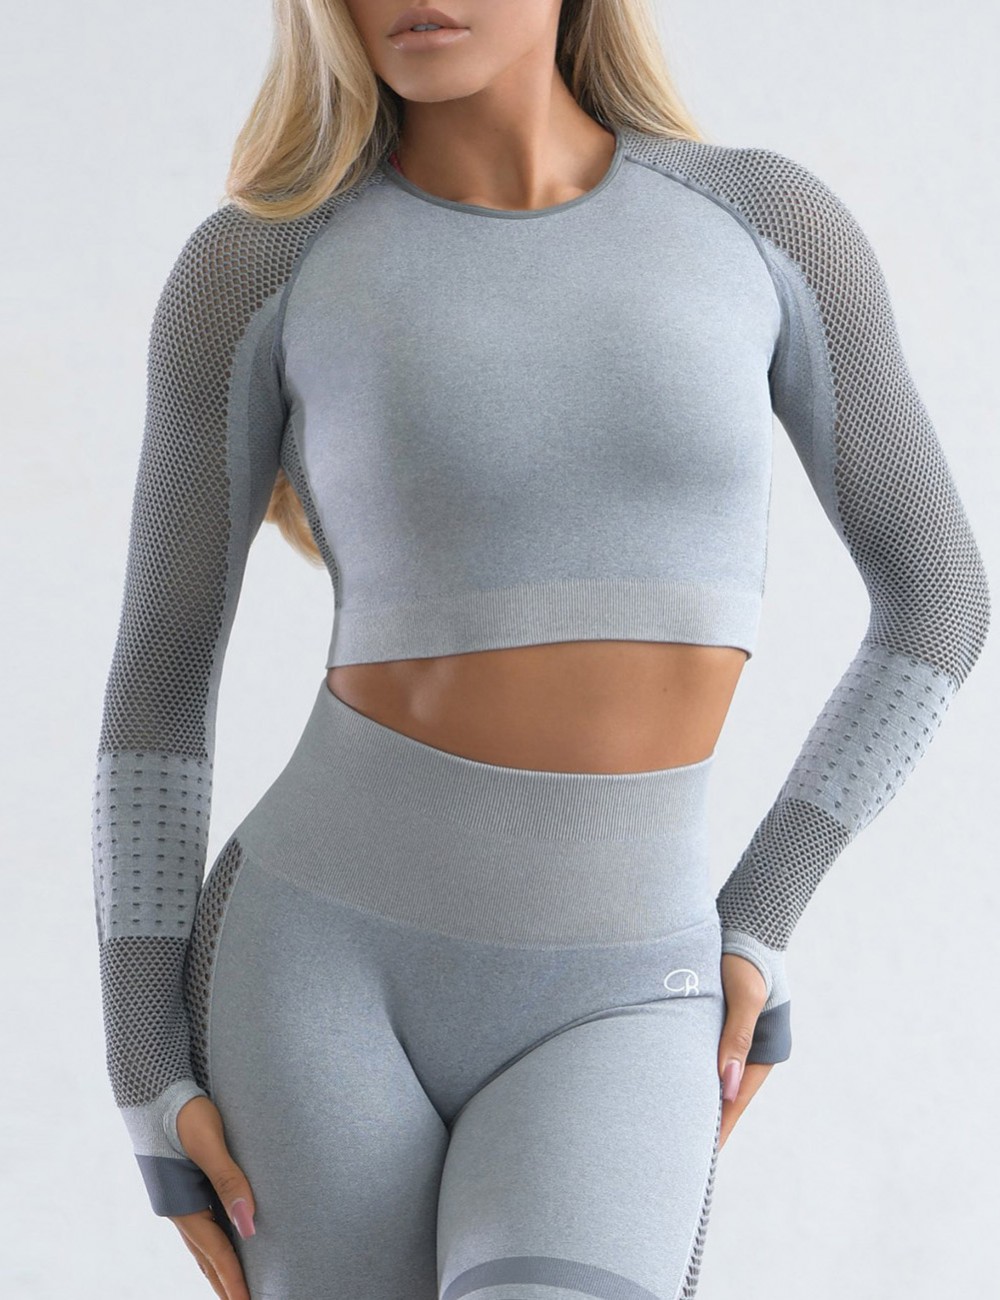 Fashionable Light Blue Long Sleeve Crew Neck Sport Crop Top For Female